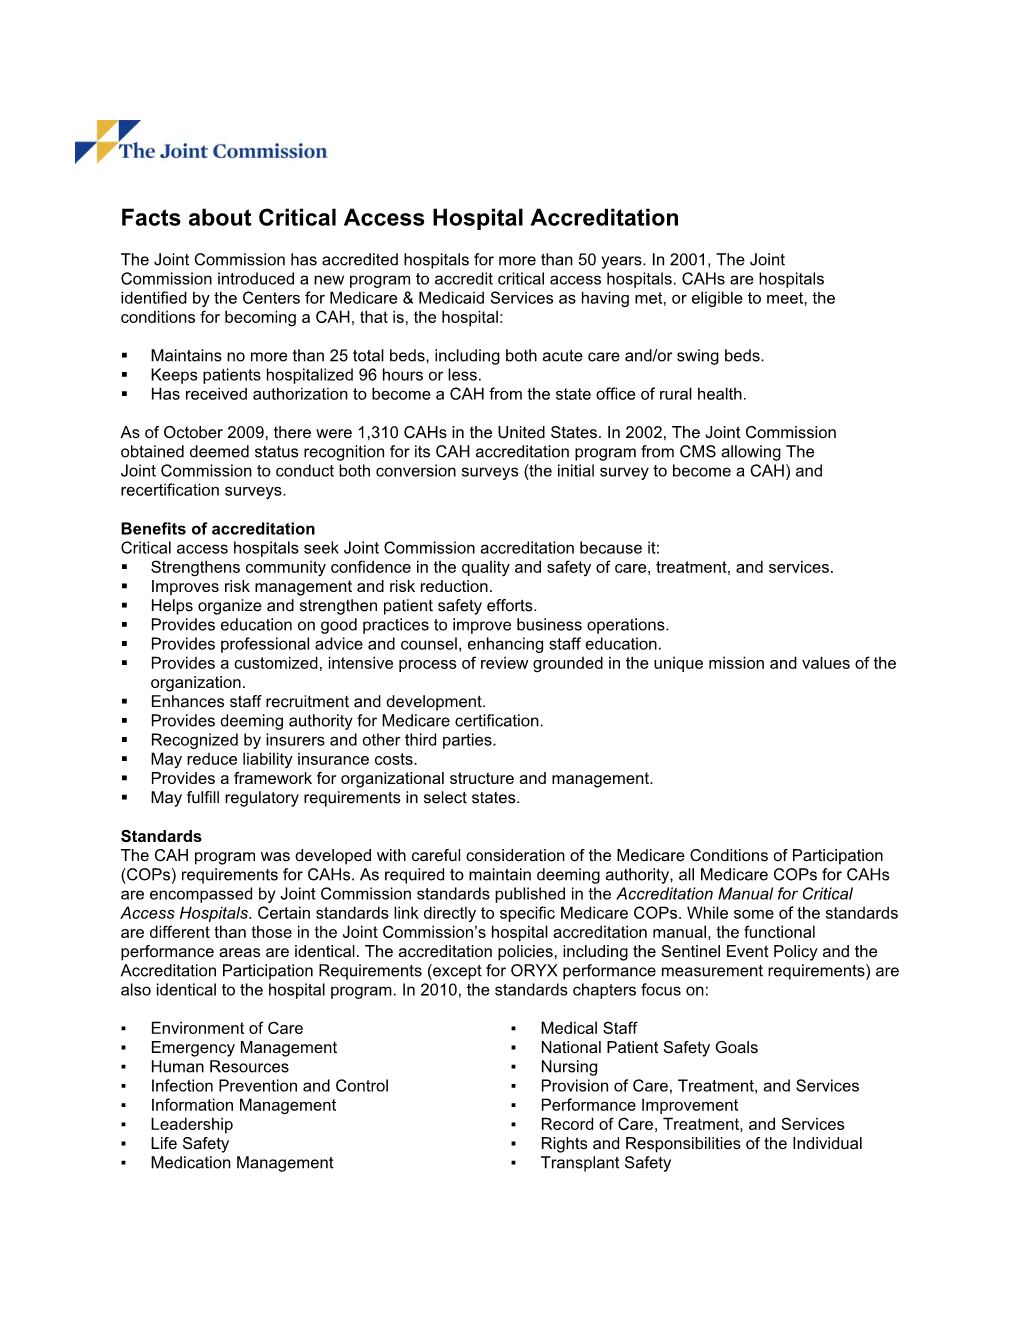 Facts About Critical Access Hospital Accreditation